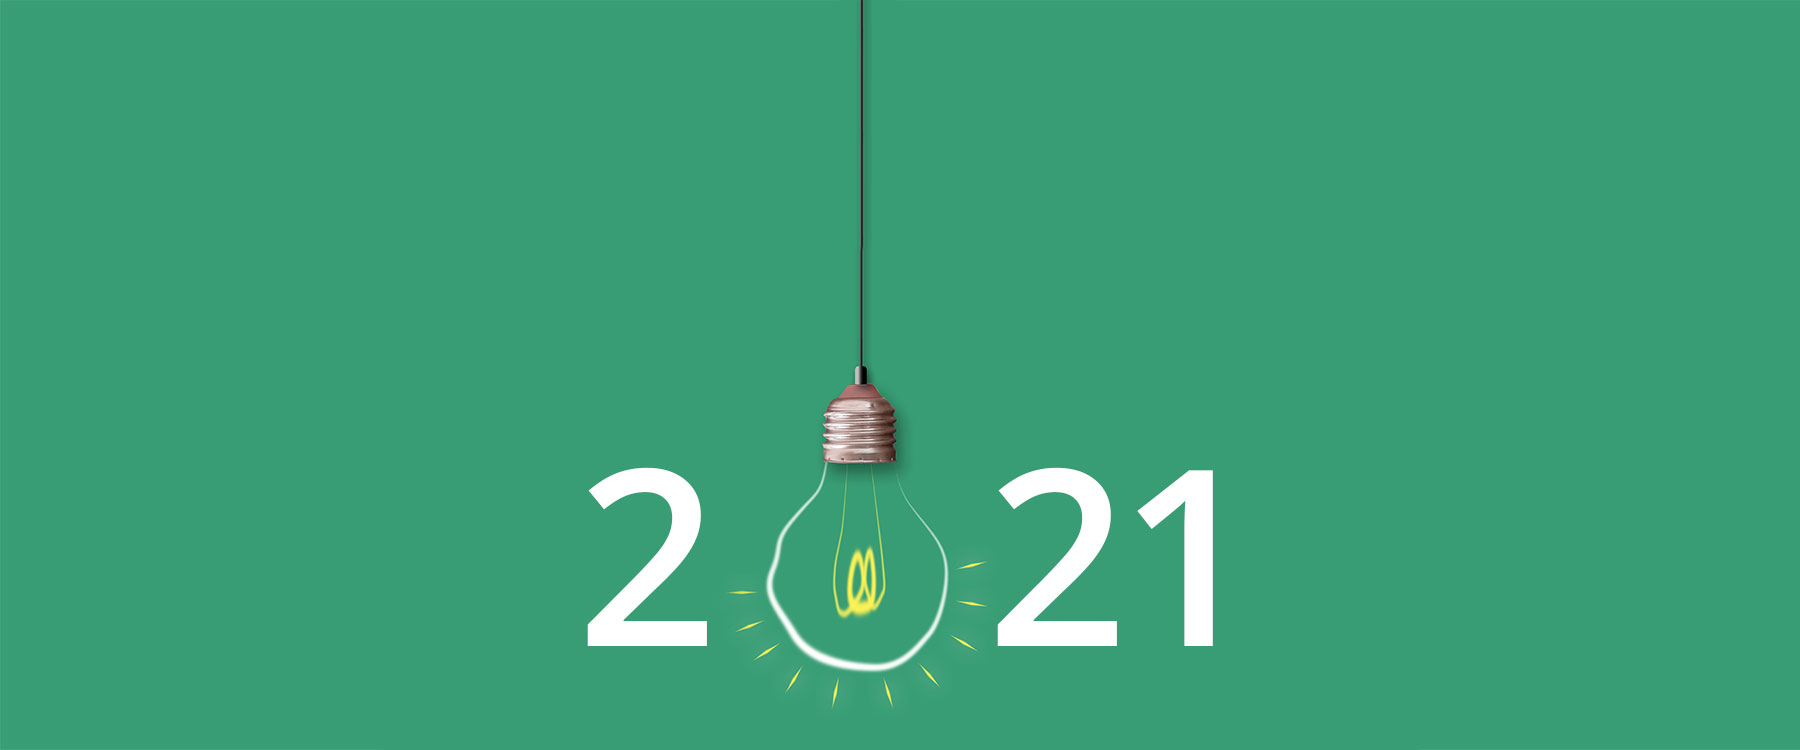 What Comes Next: Marketing Trends in 2021